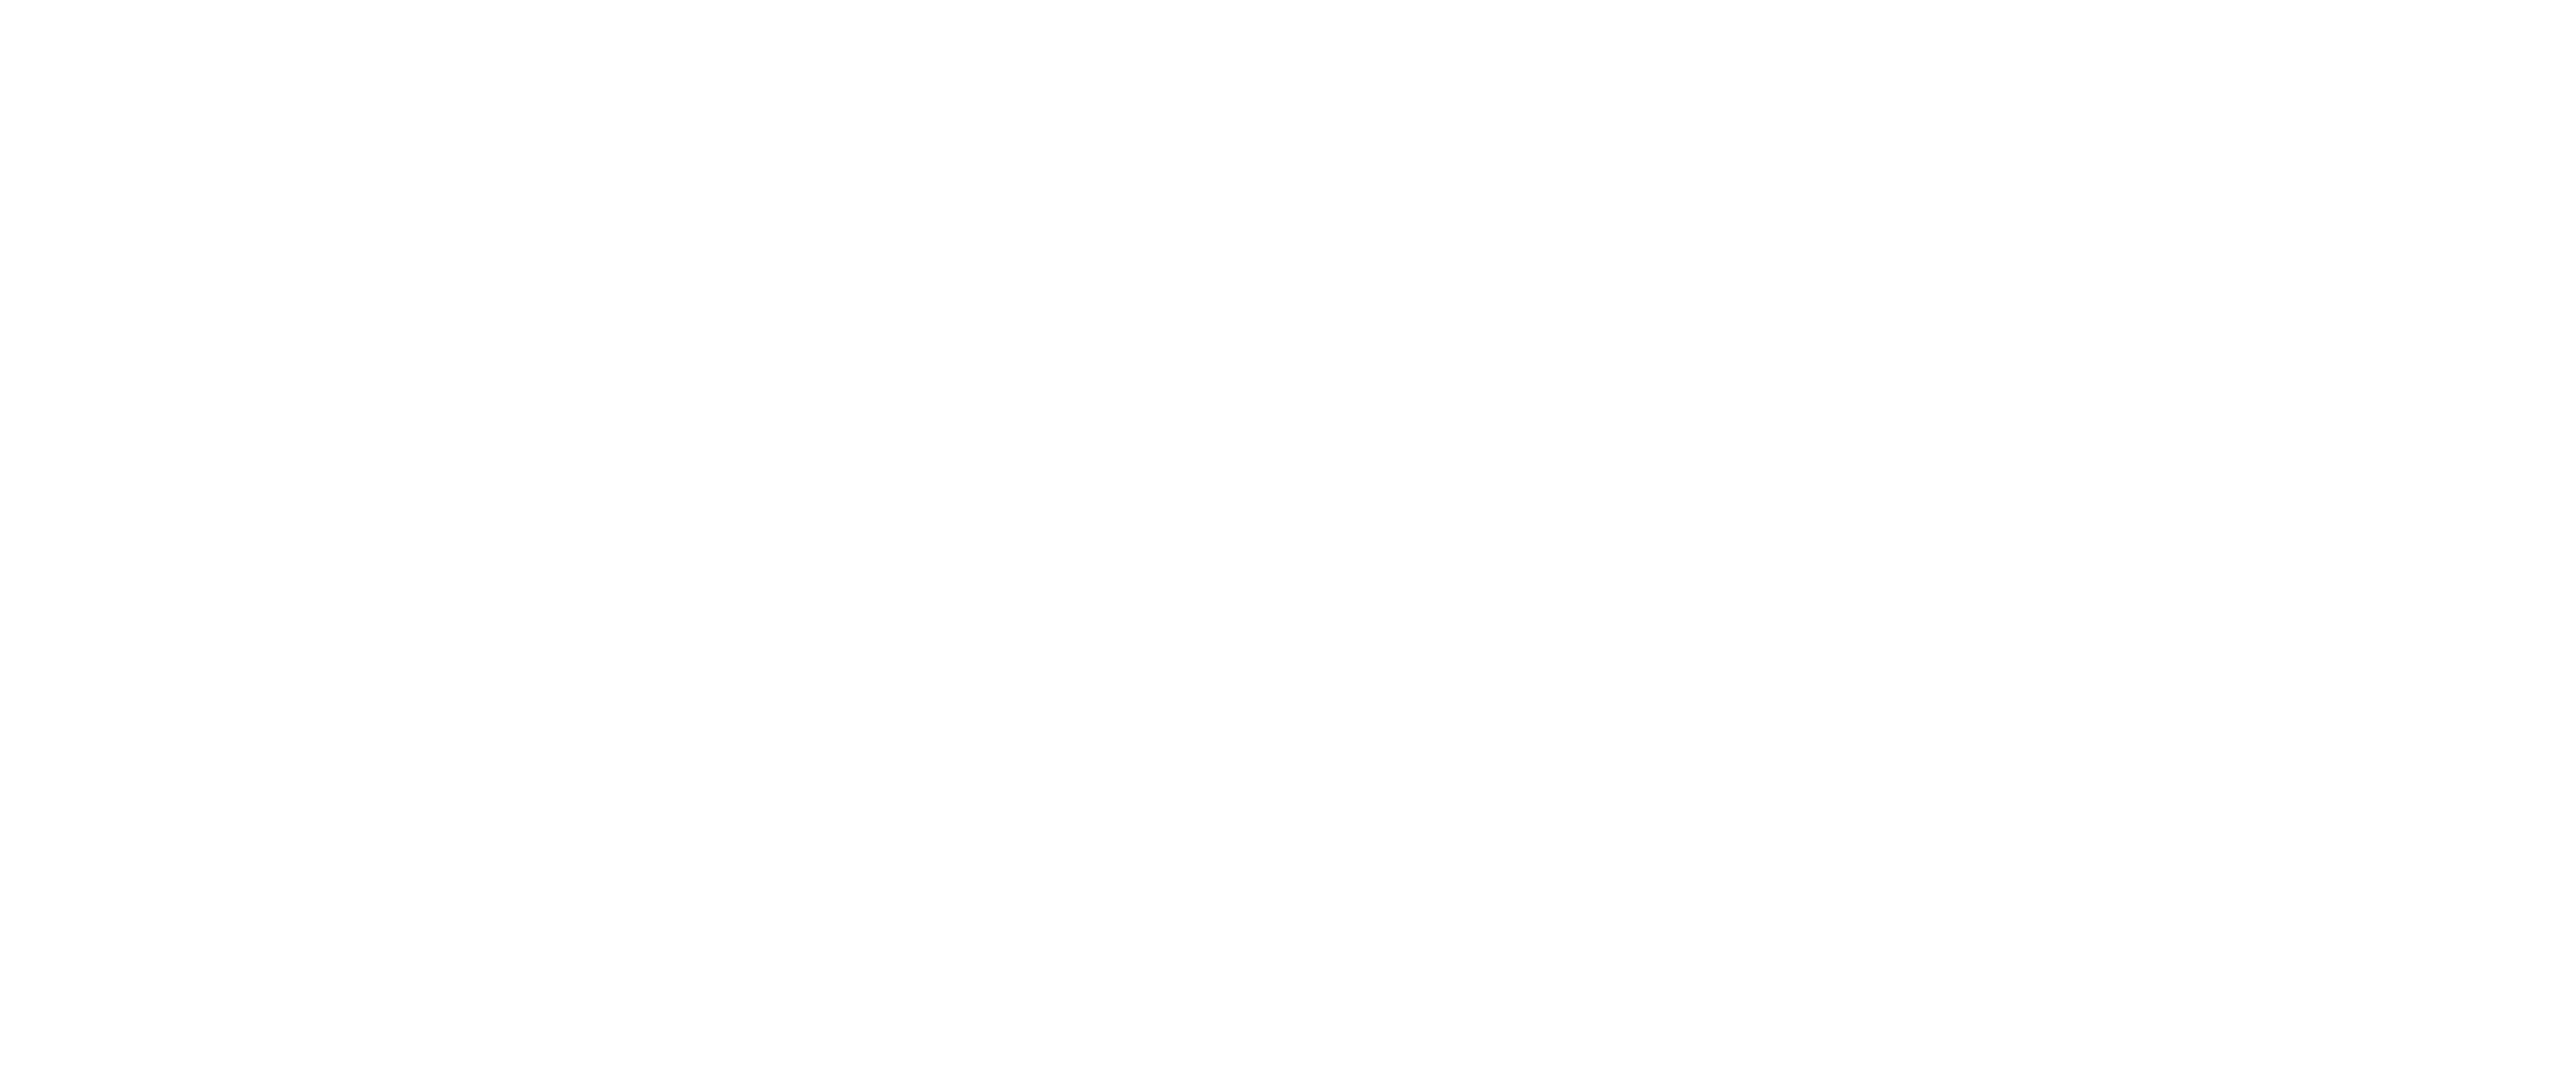 initiative for economic and social rights